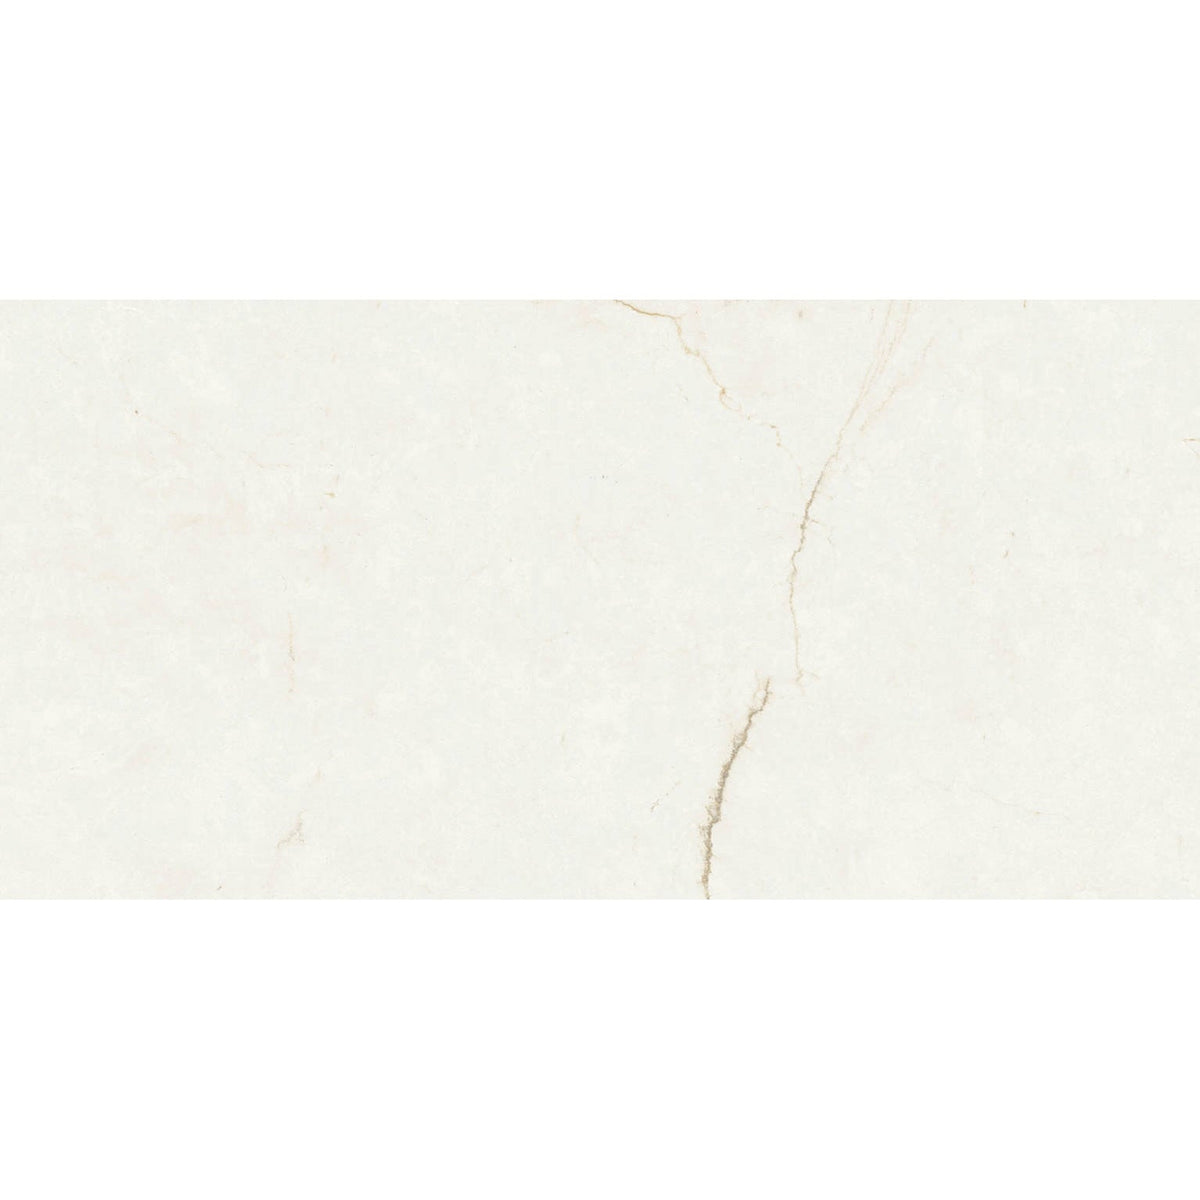 General Ceramic - Marmo Series 12 in. x 24 in. Polished Porcelain Tile - Marmo Marfil